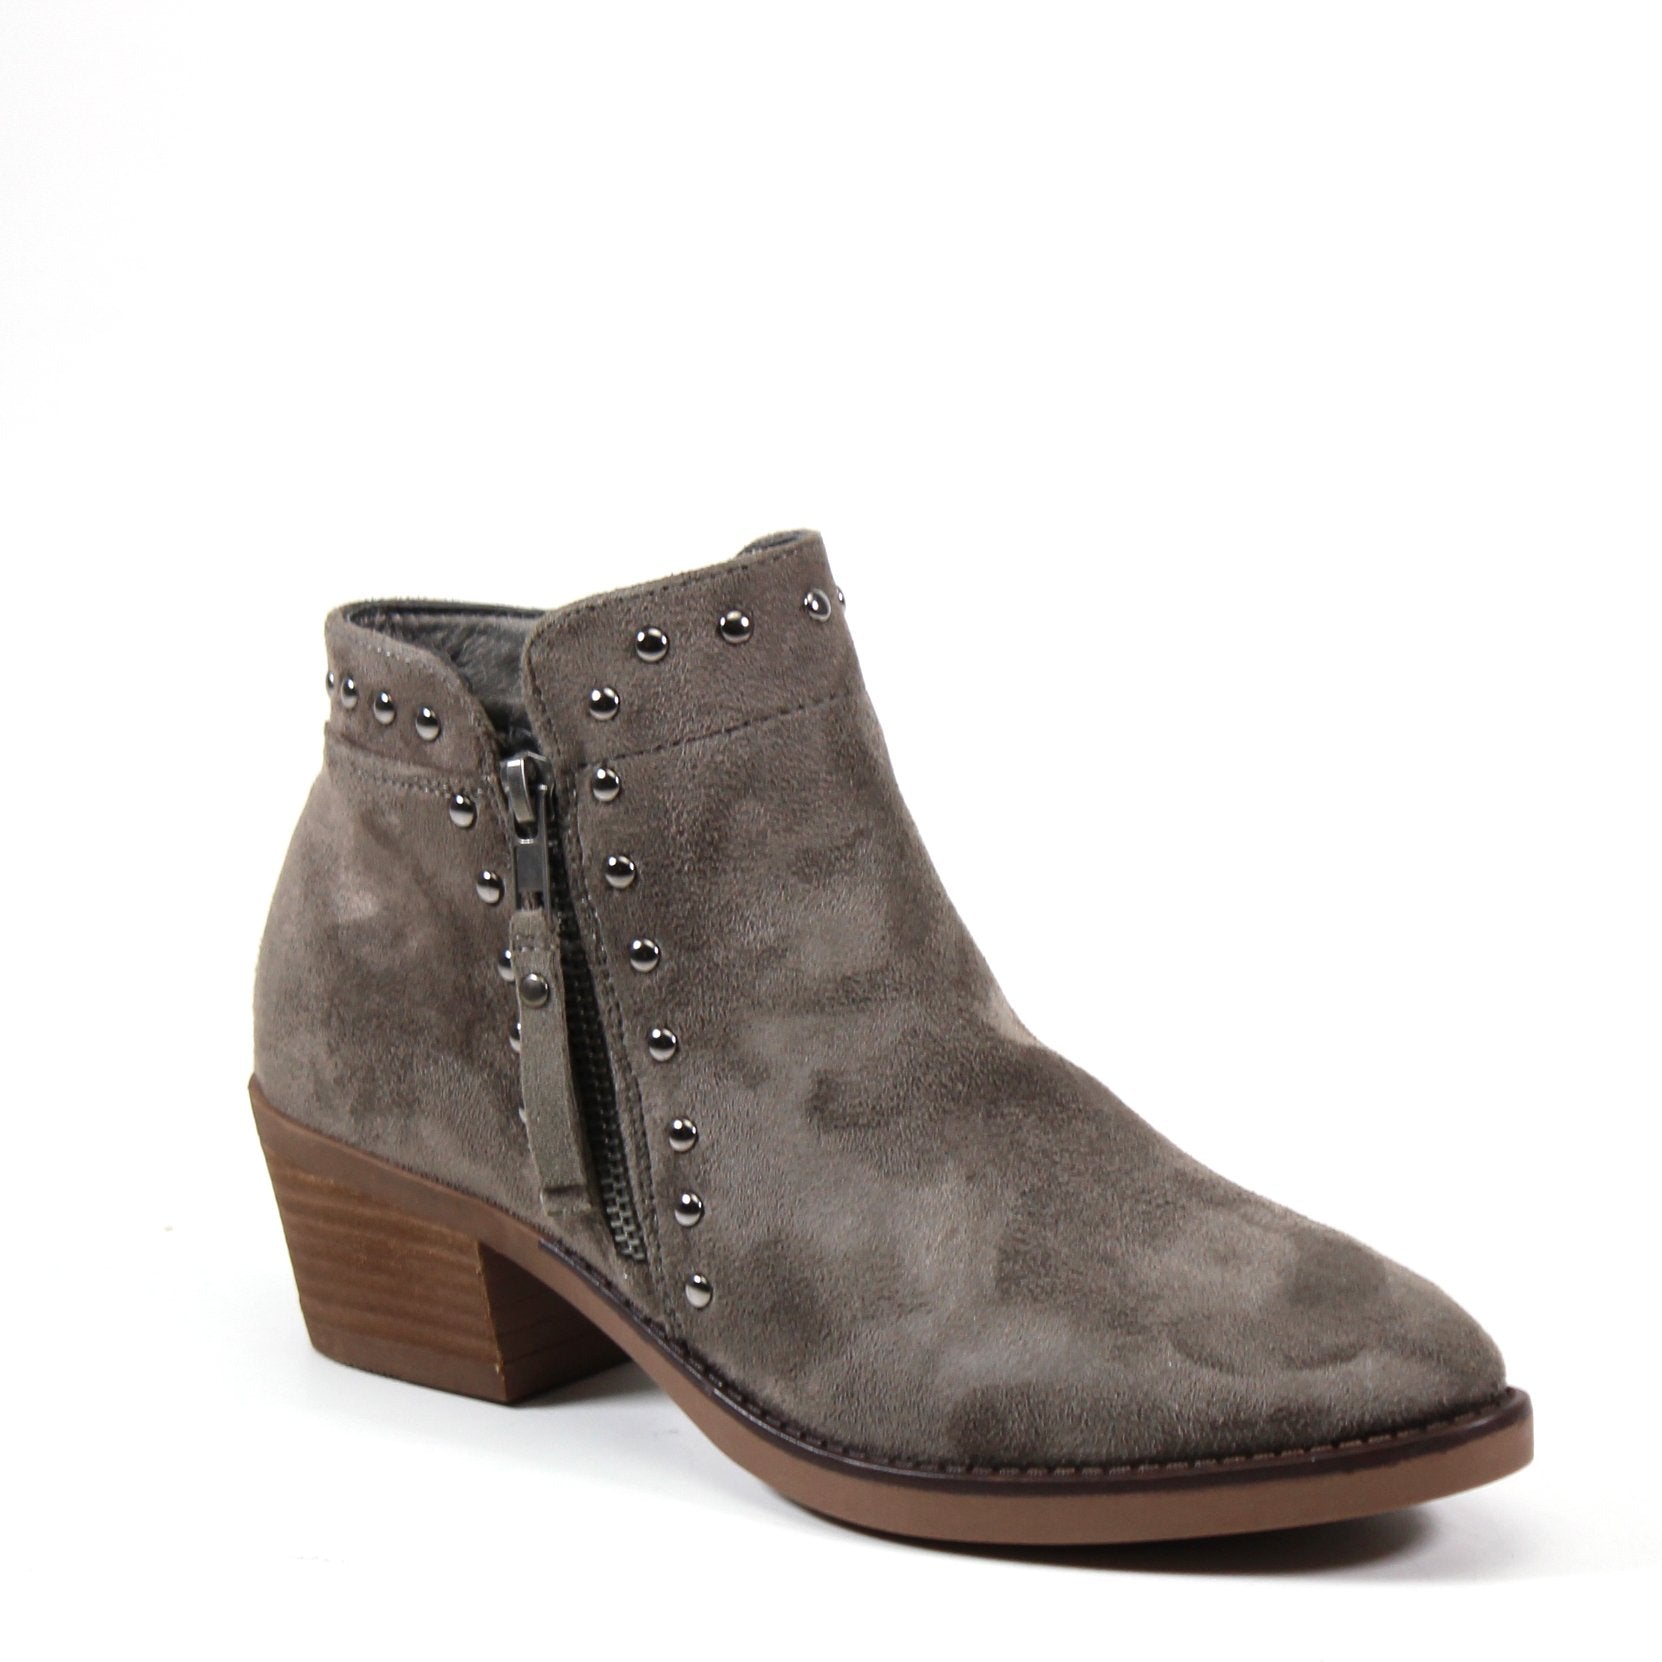  LONDON ABLE MABLE STUDDED GREY BOOTIE - Diba Shoes